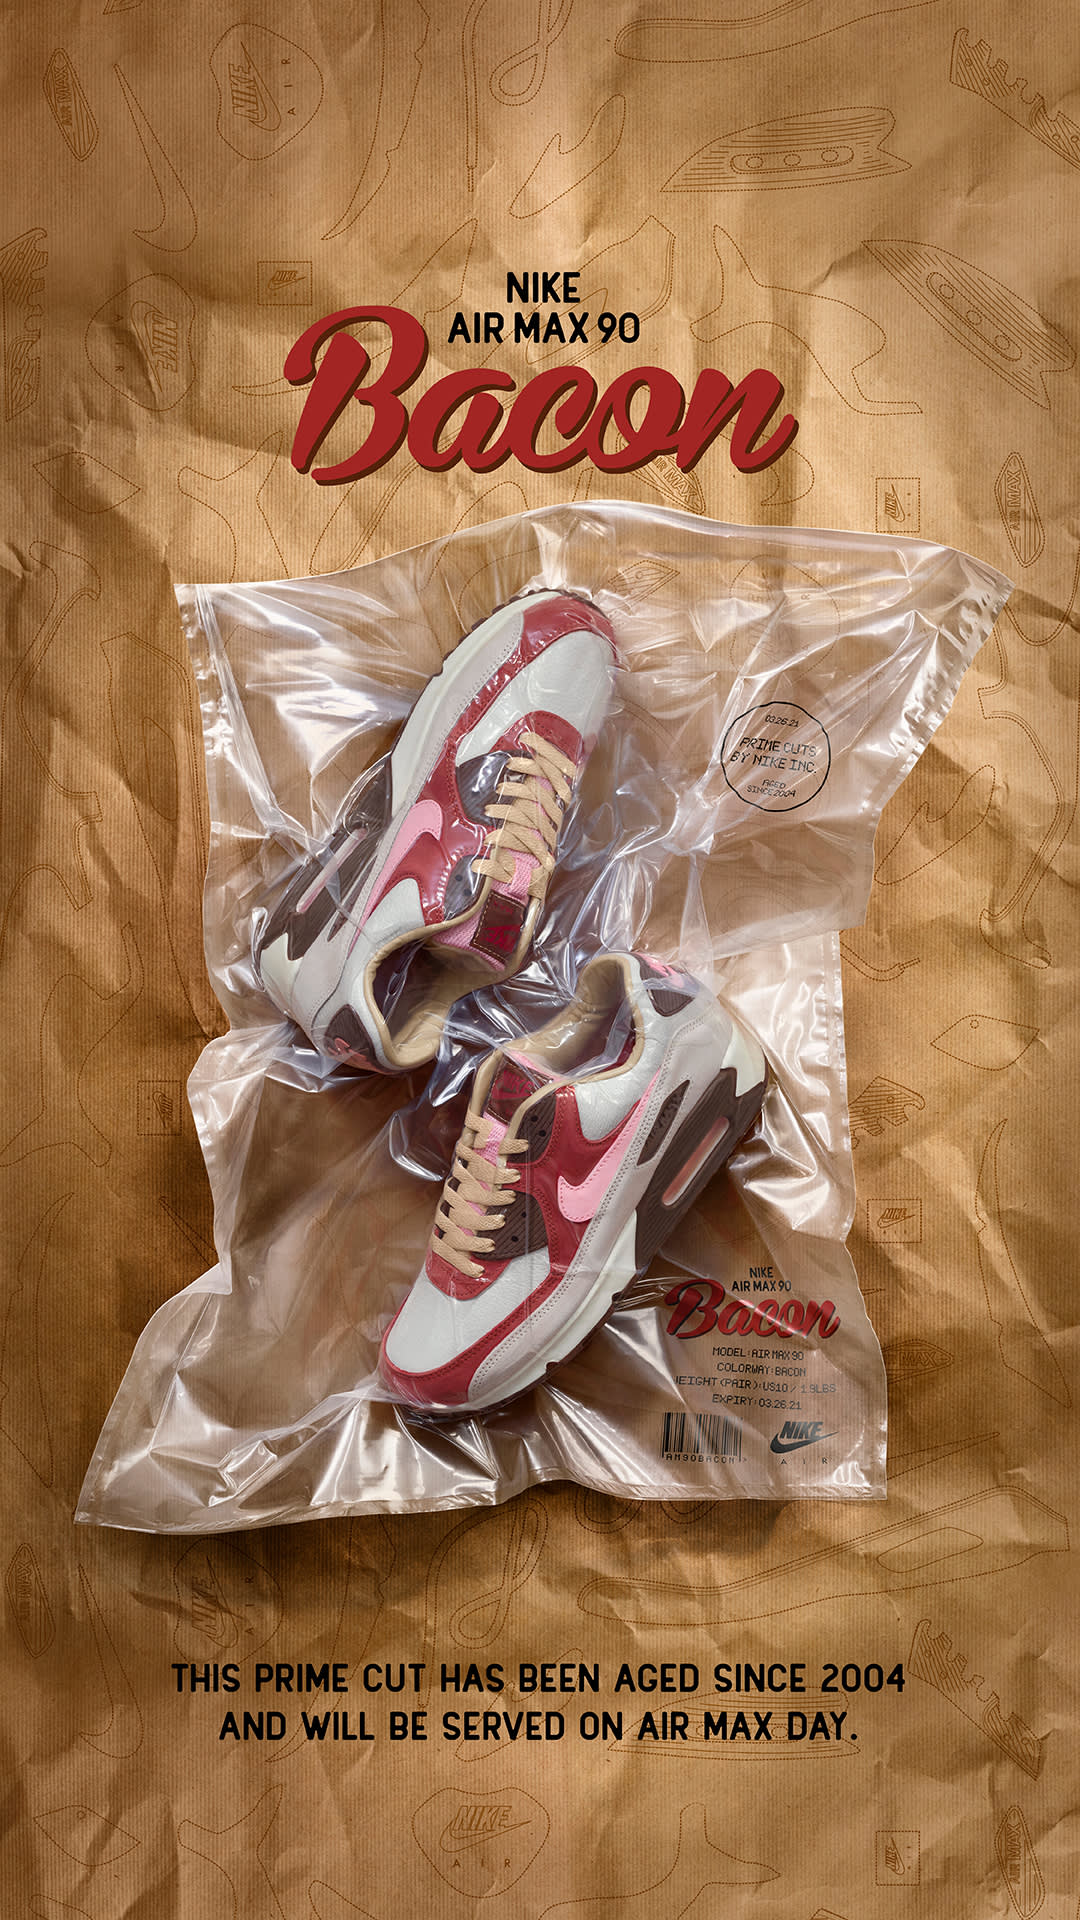 SNKRS Special: Air Max 90 'Bacon'